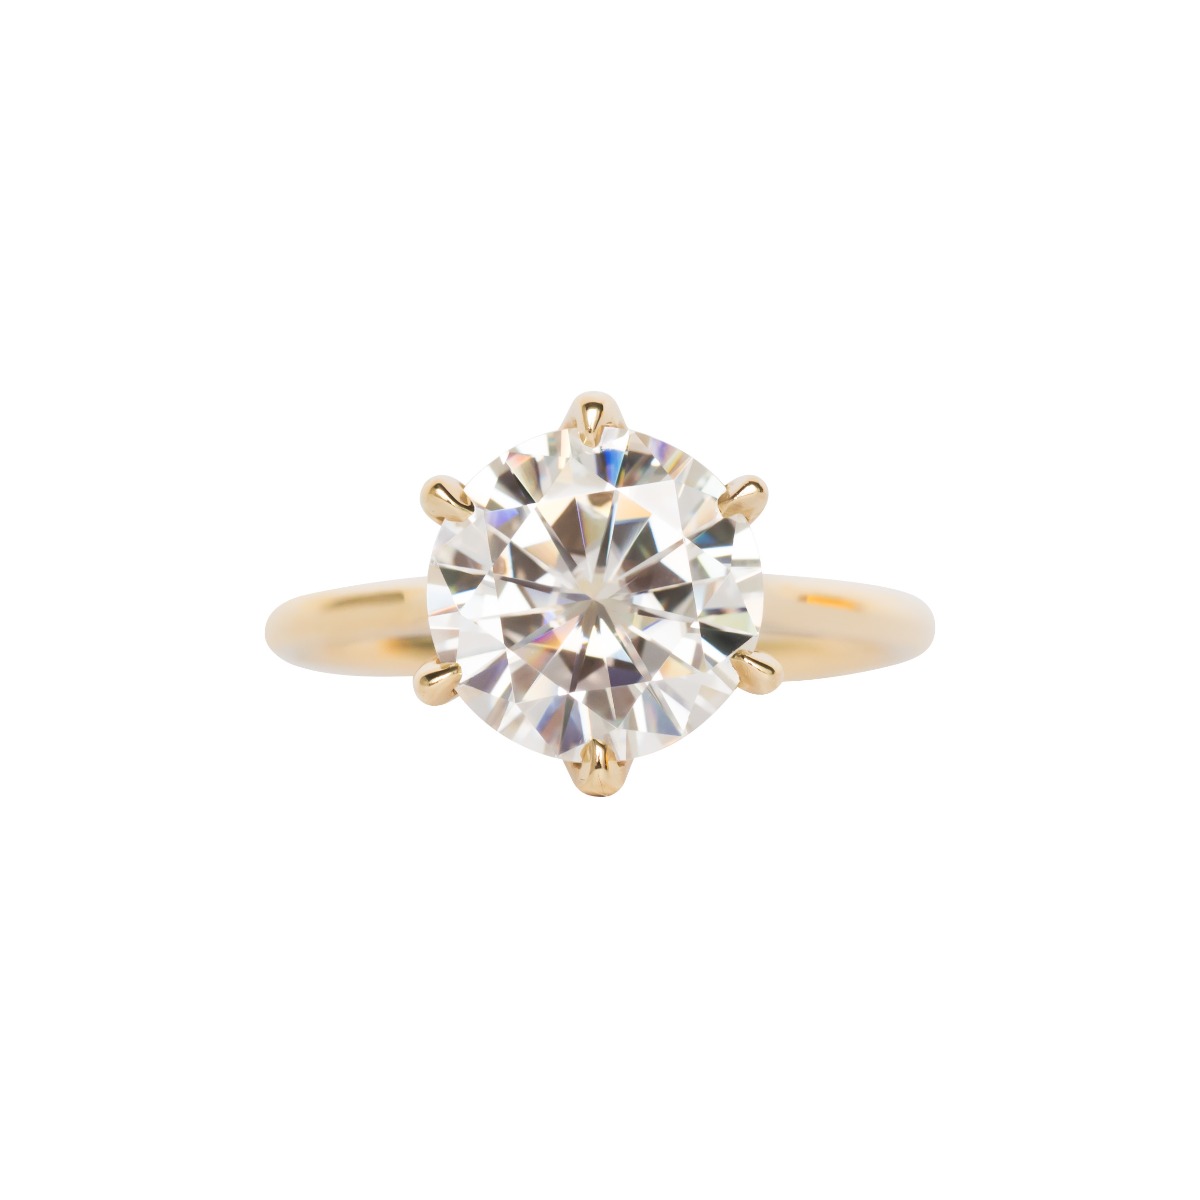 6 Prong Tulip Solitaire Setting With Diamond Bridge In Yellow Gold